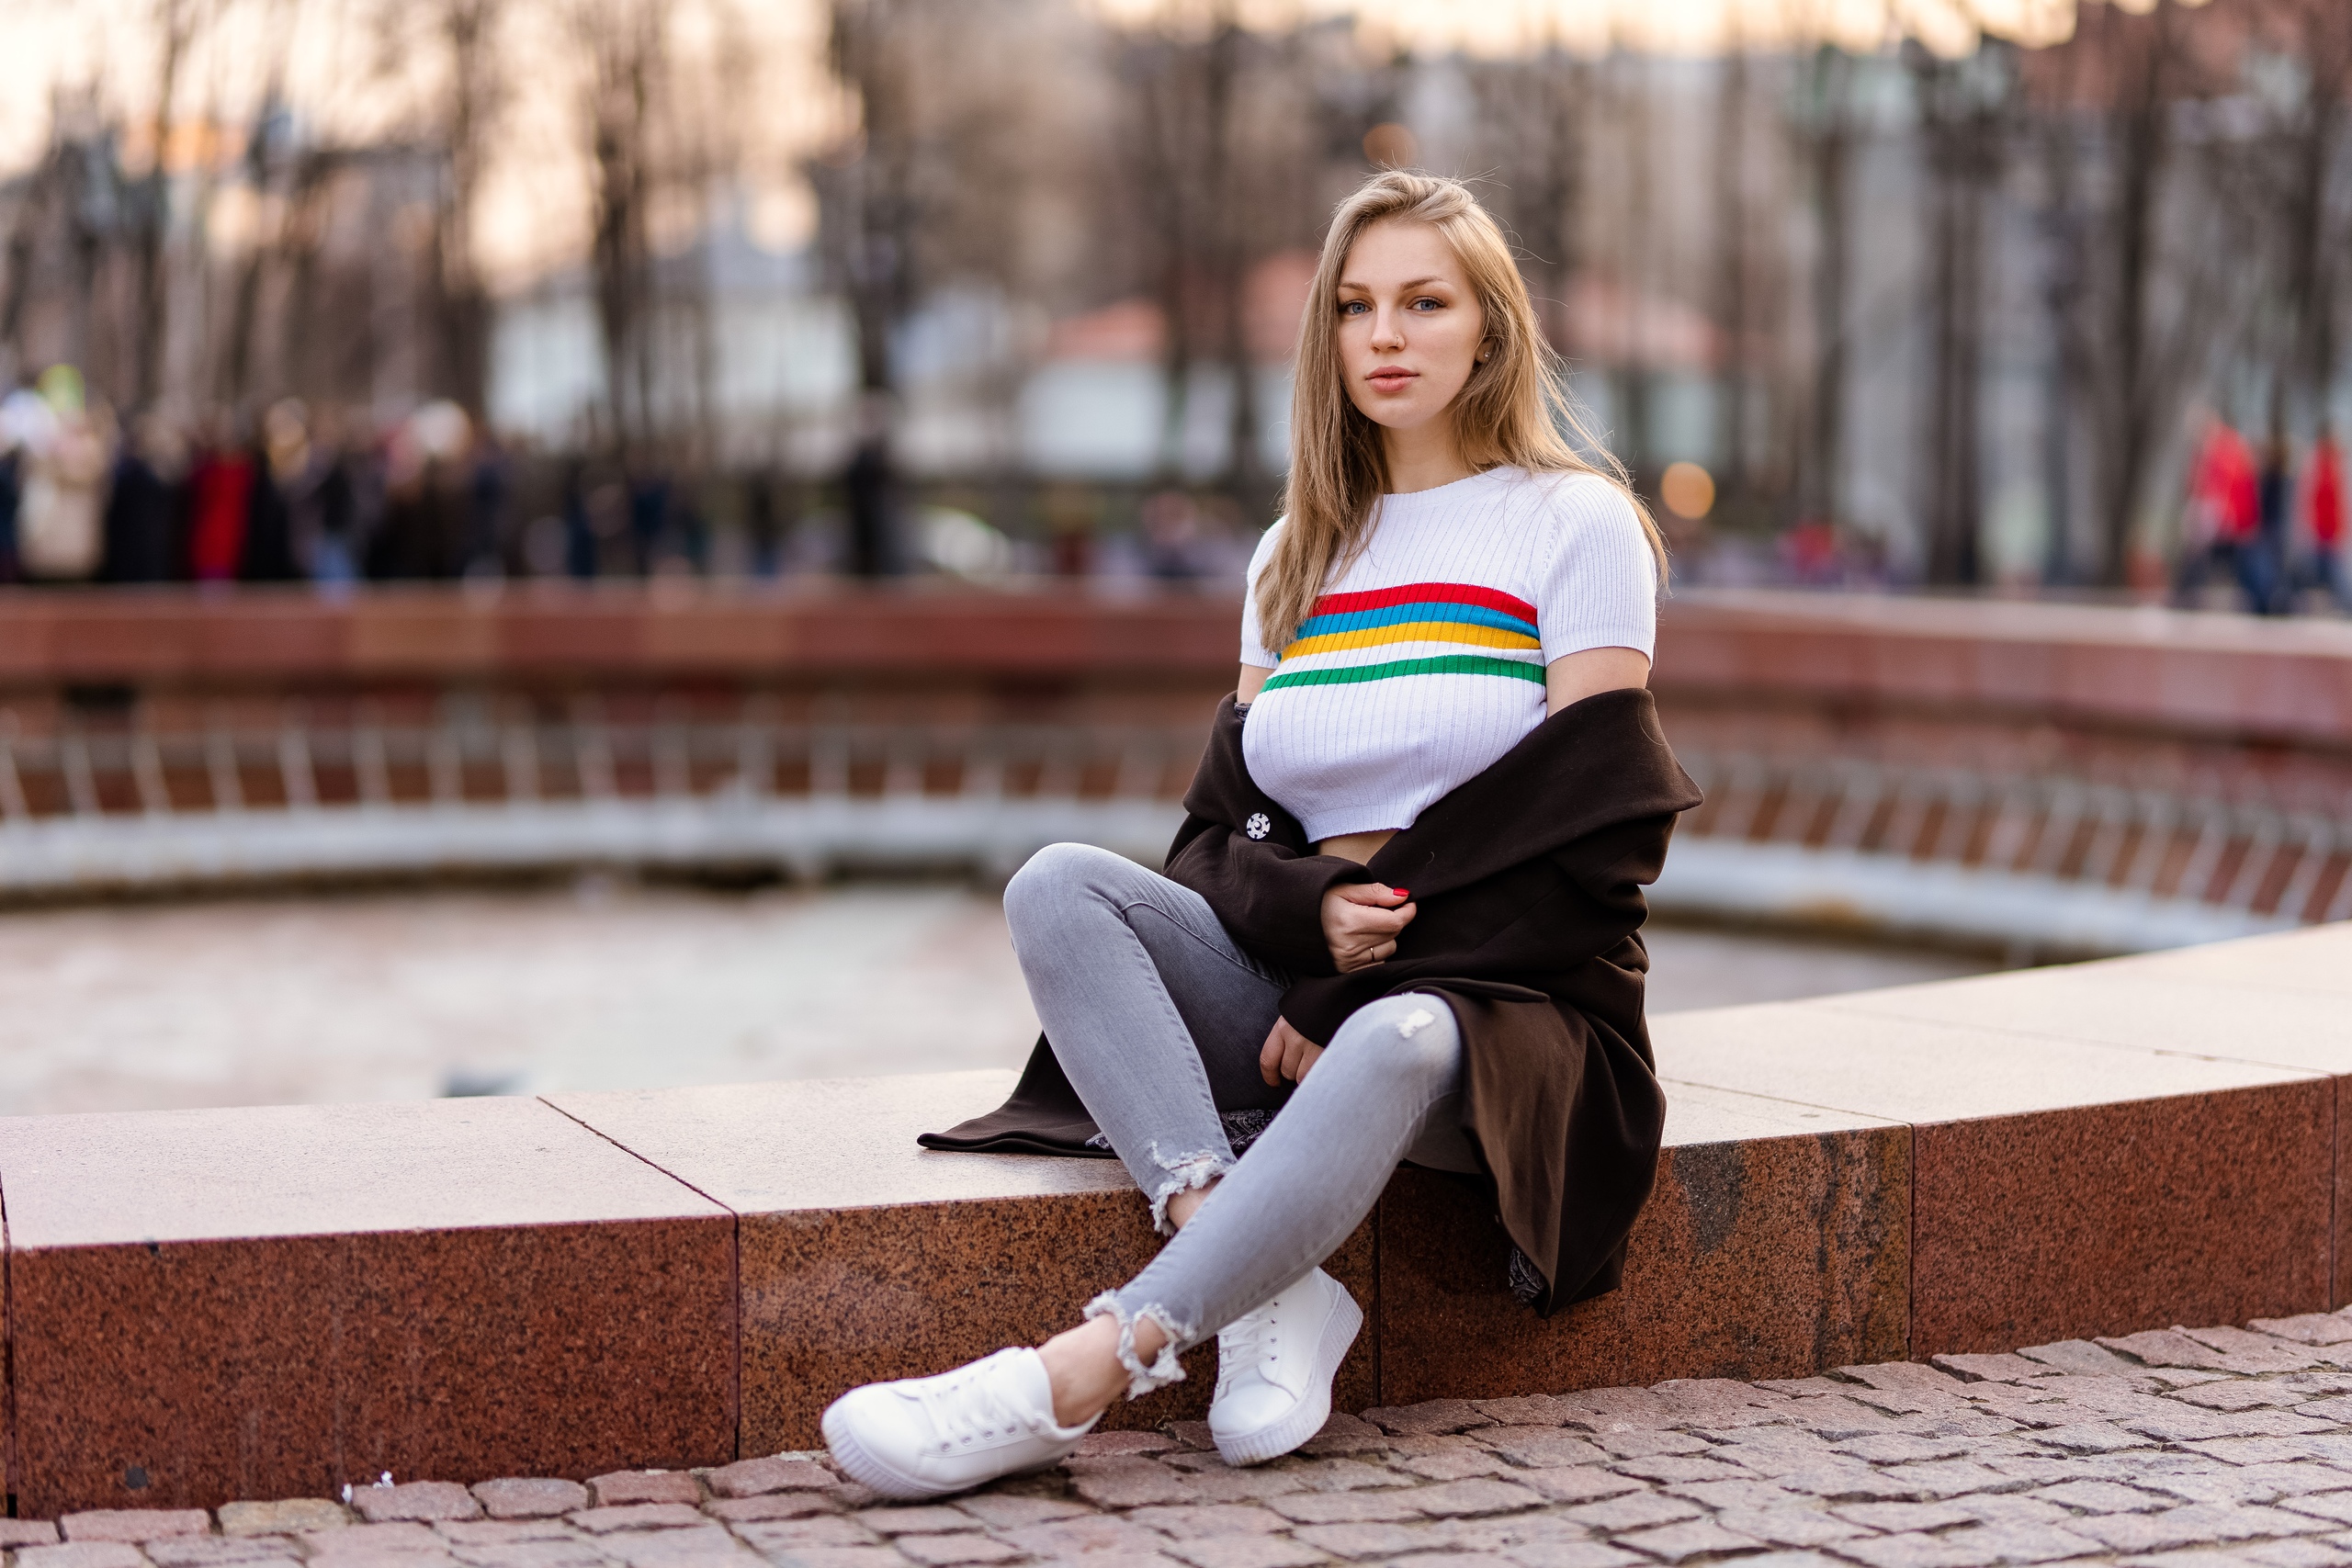 People 2560x1707 Anna Bykanova women model blonde long hair looking at viewer nose ring smiling crop top white tops jeans coats sitting urban depth of field outdoors women outdoors Ilya Pistoletov no bra painted nails red nails brown jacket T-shirt striped tops Caucasian nipple bulge